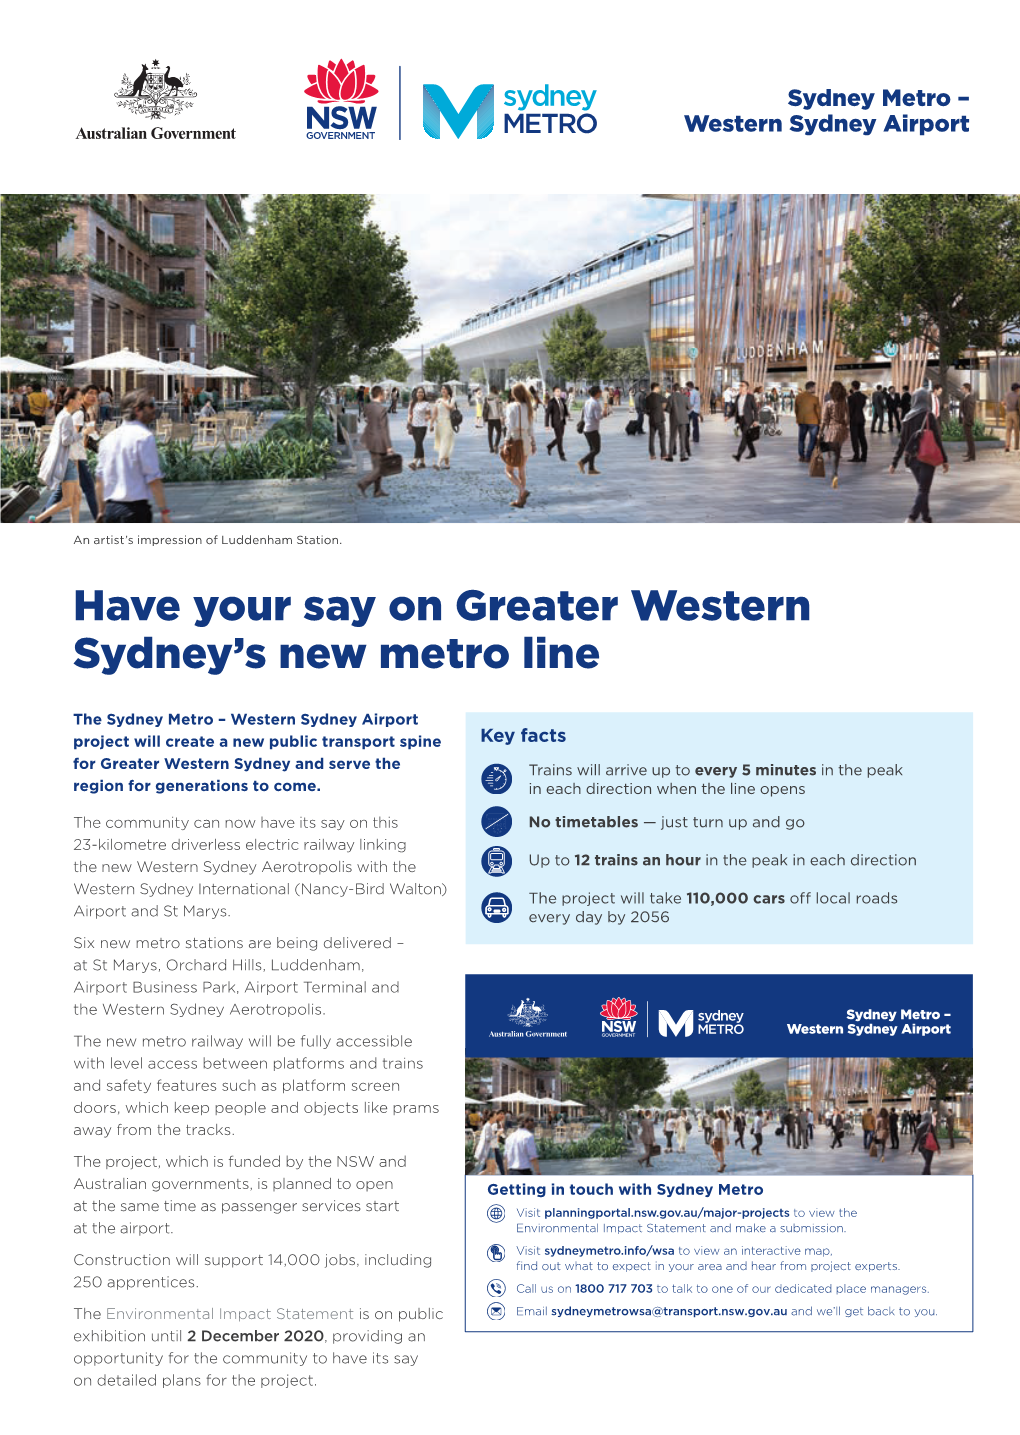 Have Your Say on Greater Western Sydney's New Metro Line